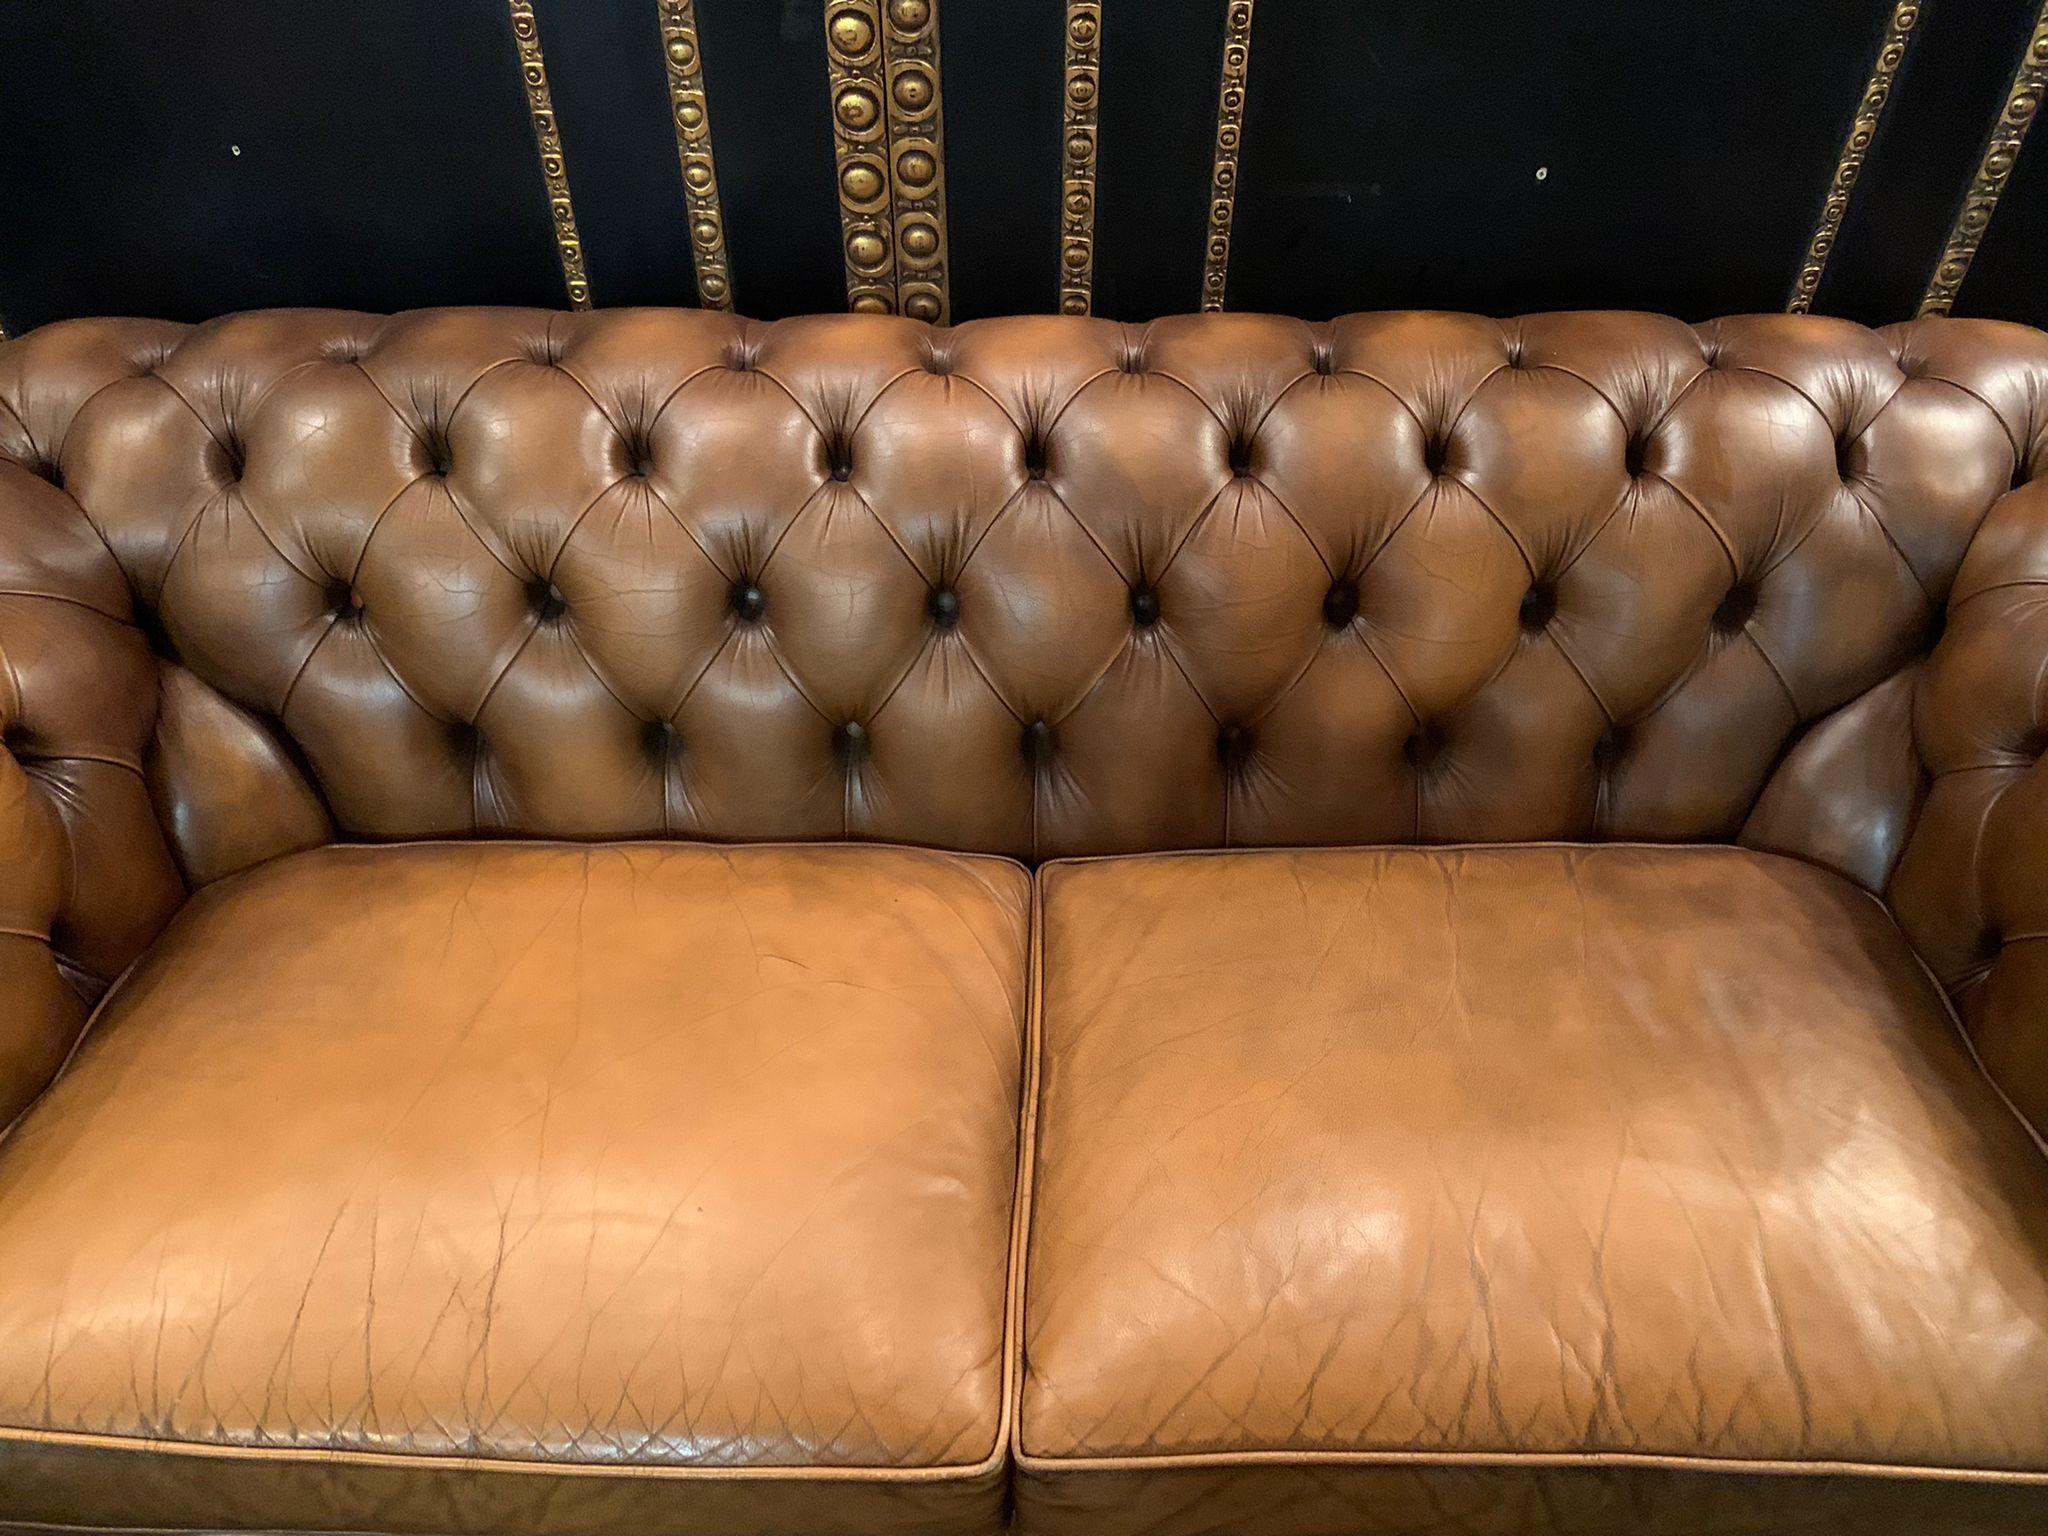 A vintage chesterfield sofa, is crafted out of solid wood and leather, The sofa has been waxed giving it a beautiful patina finish, features a tufted back and arm design, and has a comfortable large seat cushions. 
Leather feet in a rich walnut